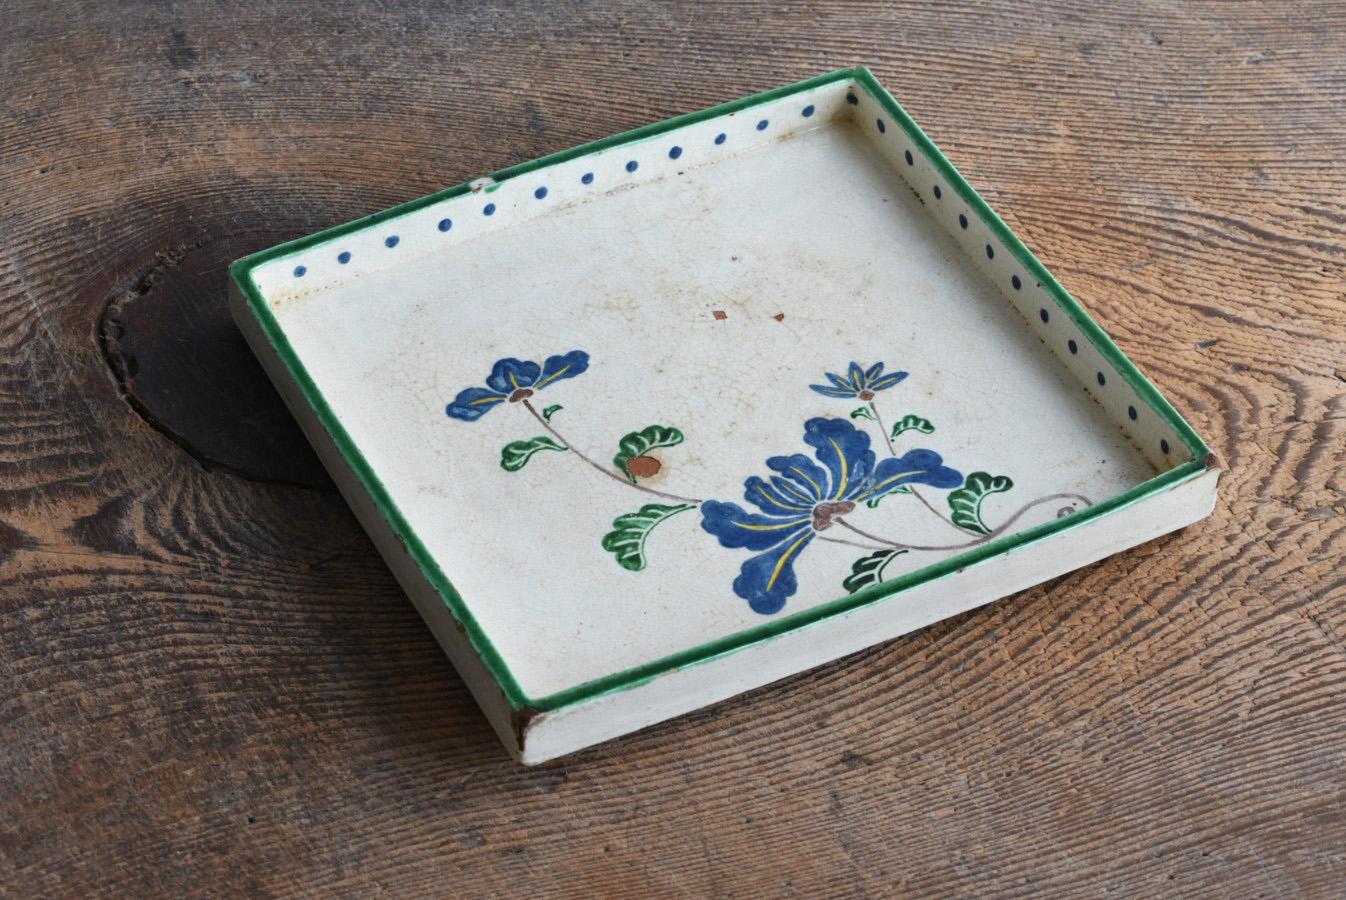 This is an overglaze ceramic square plate made in the late Edo period.
It's made in Kyoto.
It is thought that this pottery was made based on a design by a potter called 